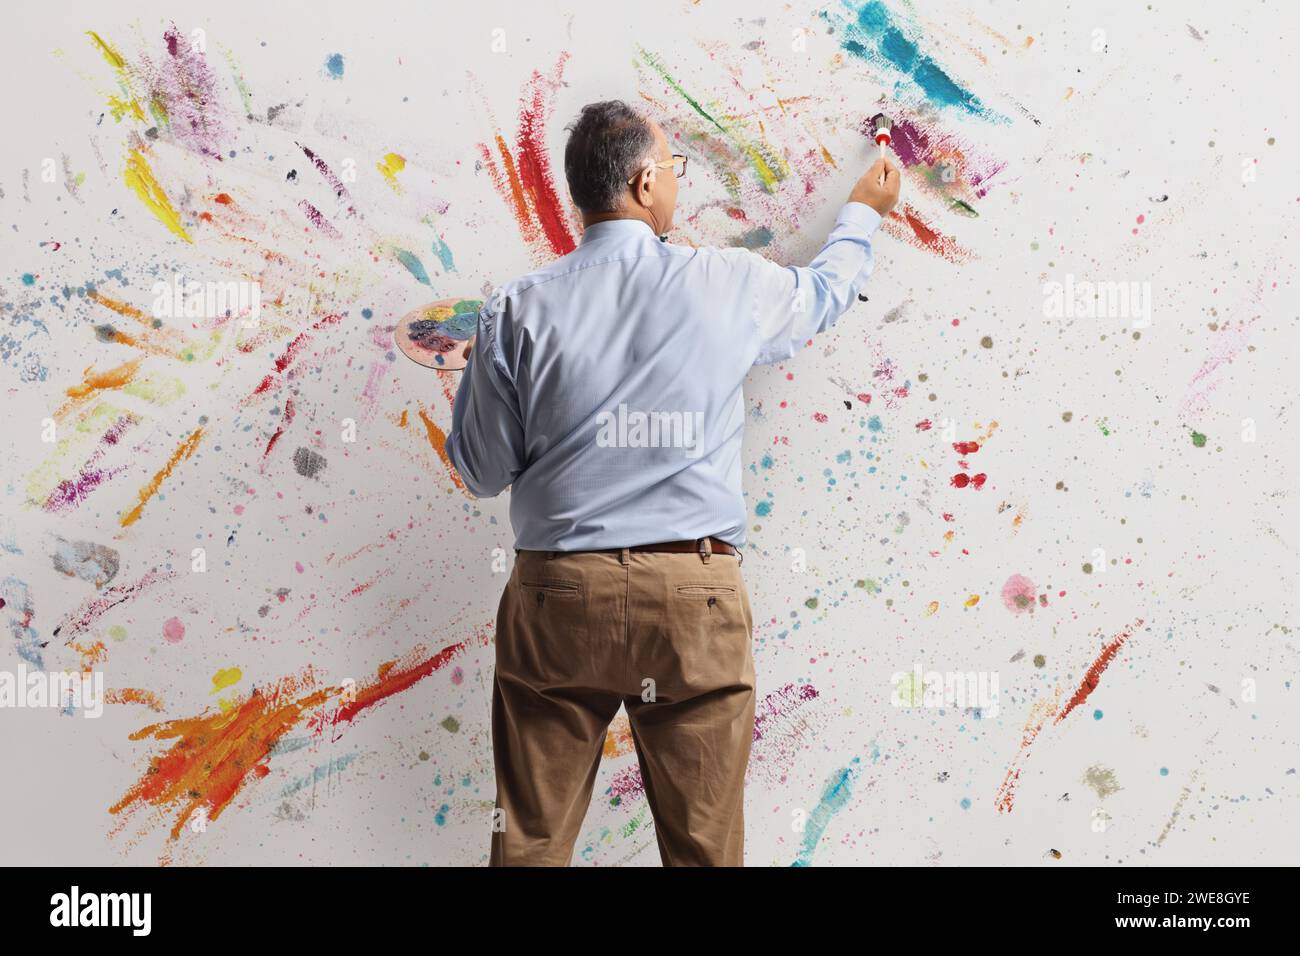 Rear view shot of a mature man painting with acyrlic paints on a wall Stock Photo